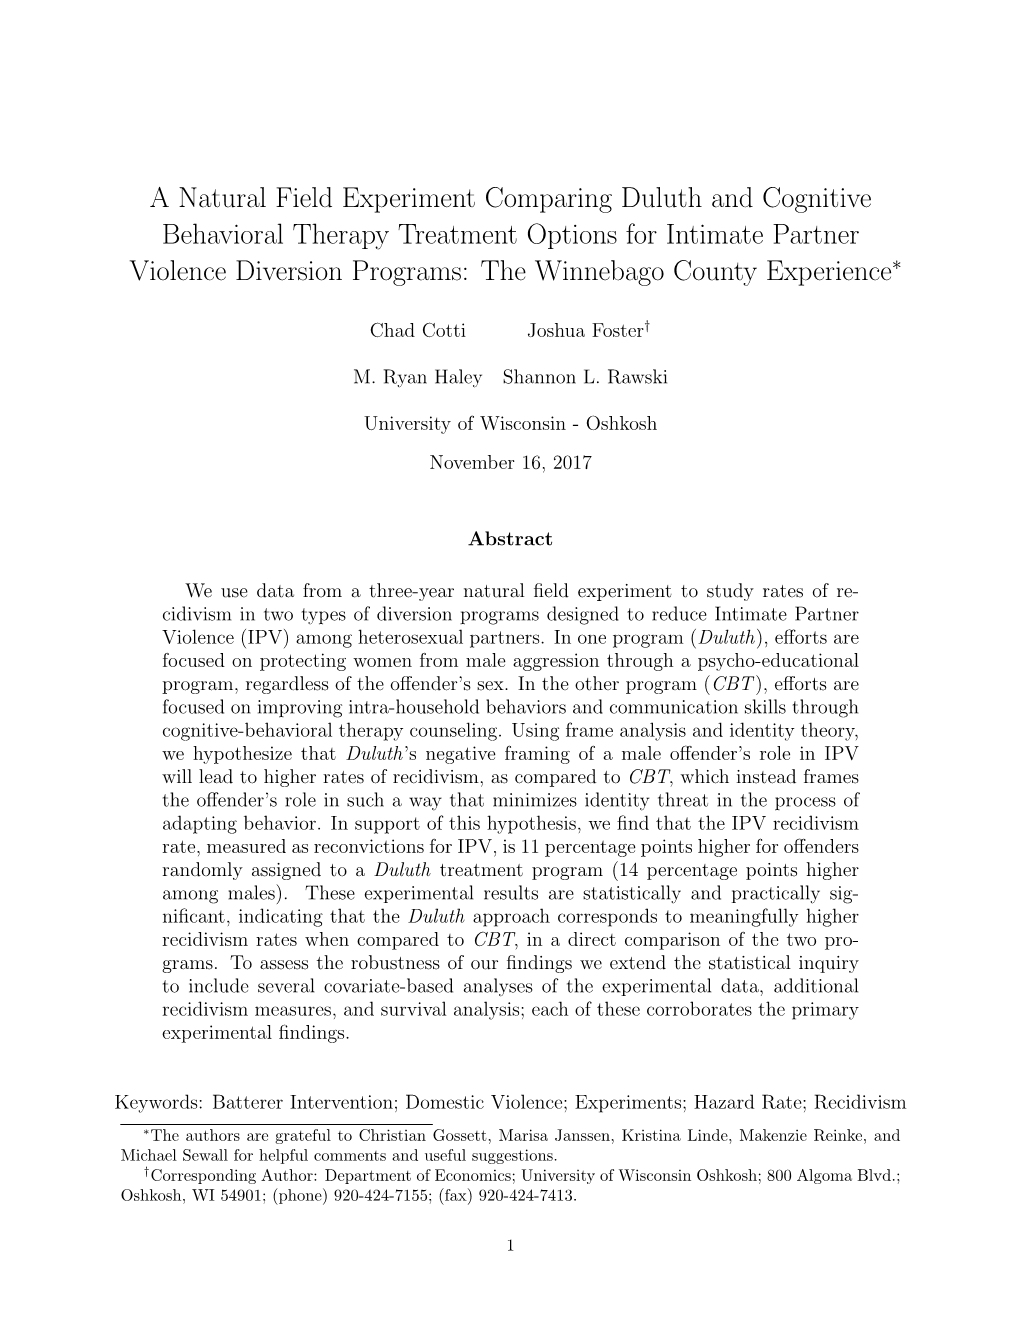 A Natural Field Experiment Comparing Duluth and Cognitive